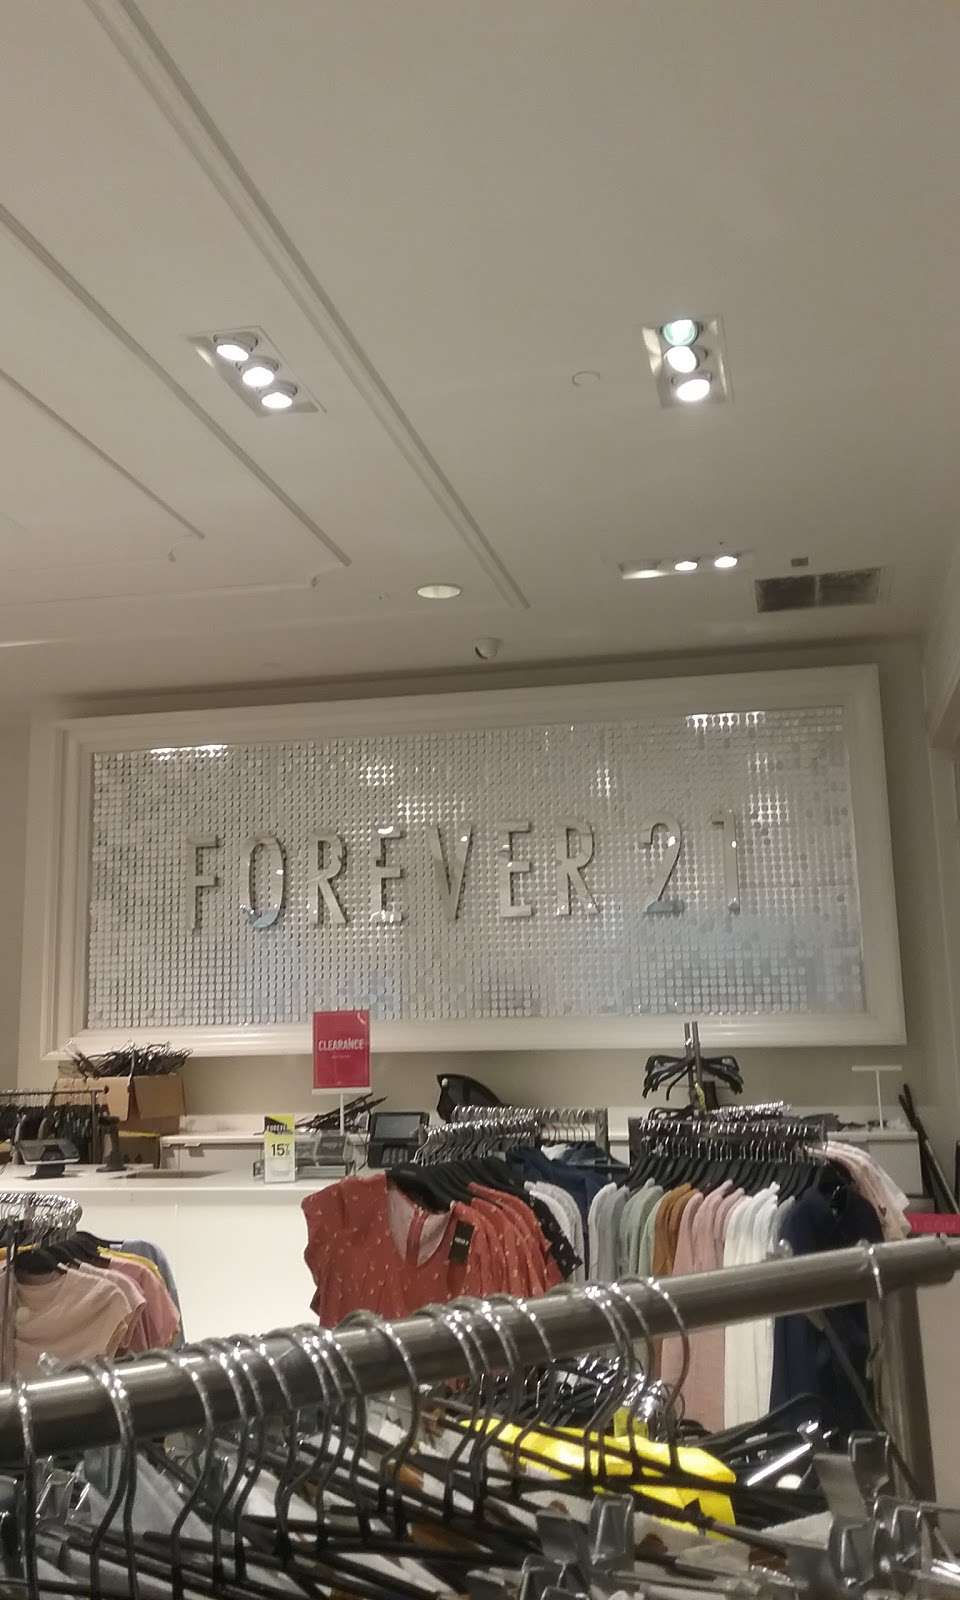 Forever 21 | 2500 W Moreland Rd #2001, Willow Grove, PA 19090, USA | Phone: (215) 346-4007